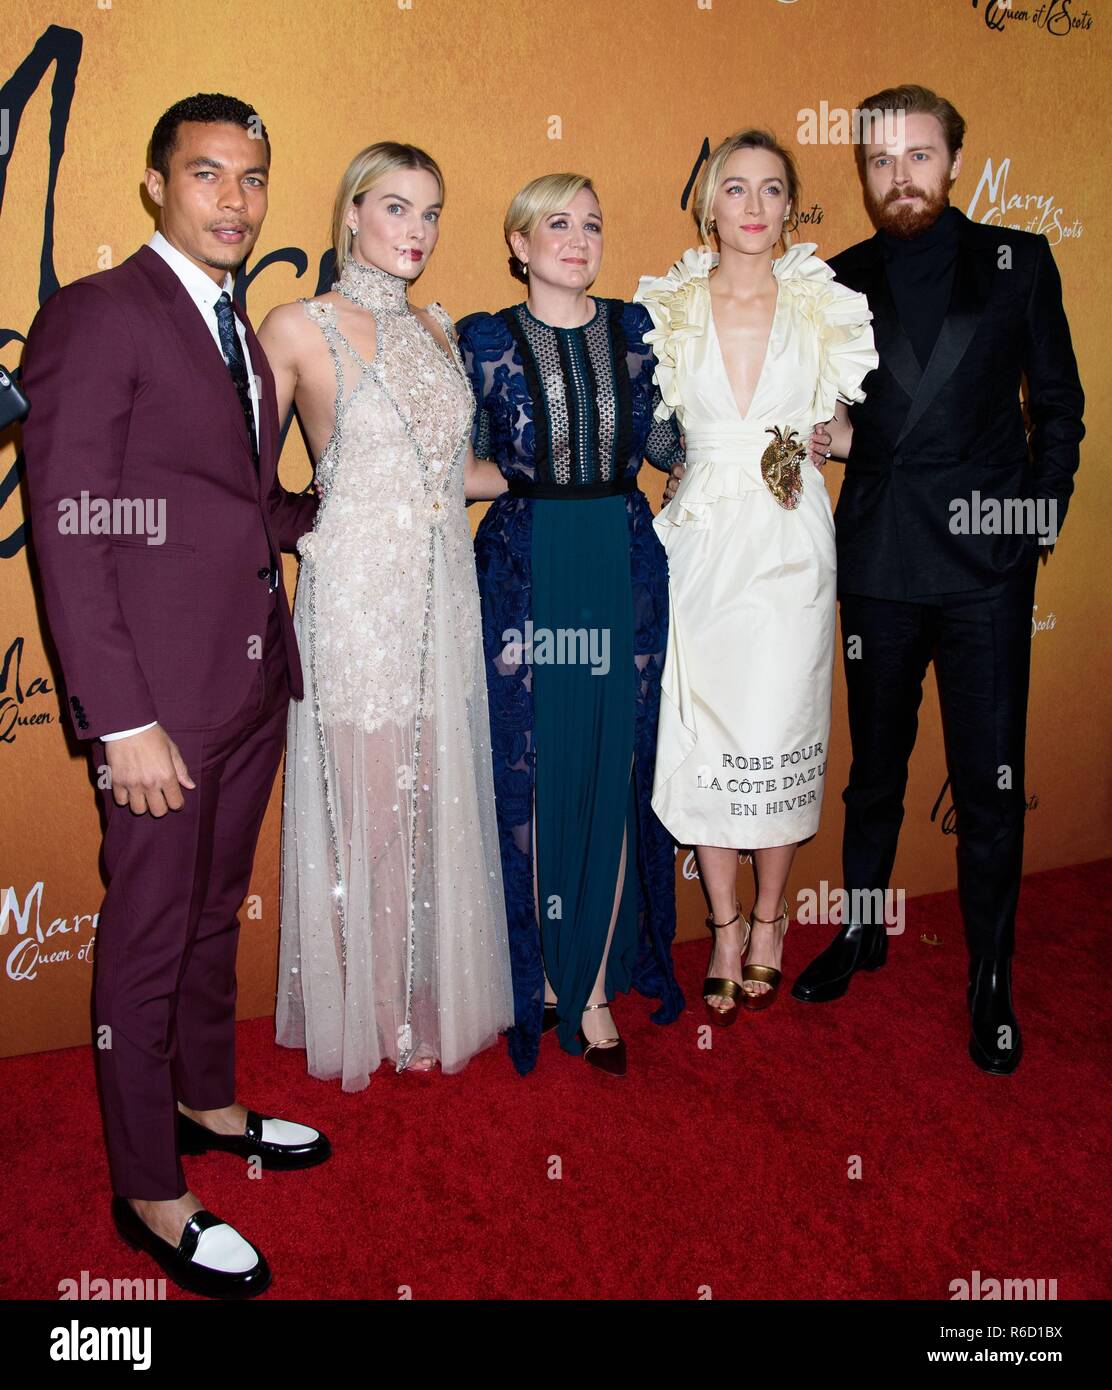 New York, NY, USA. 4th Dec, 2018. Ismael Cruz Cordova, Margot Robbie, Josie Rourke, Saoirse Ronan, Jack Lowden at arrivals for MARY QUEEN OF SCOTS Premiere, The Paris Theater, New York, NY December 4, 2018. Credit: RCF/Everett Collection/Alamy Live News Stock Photo